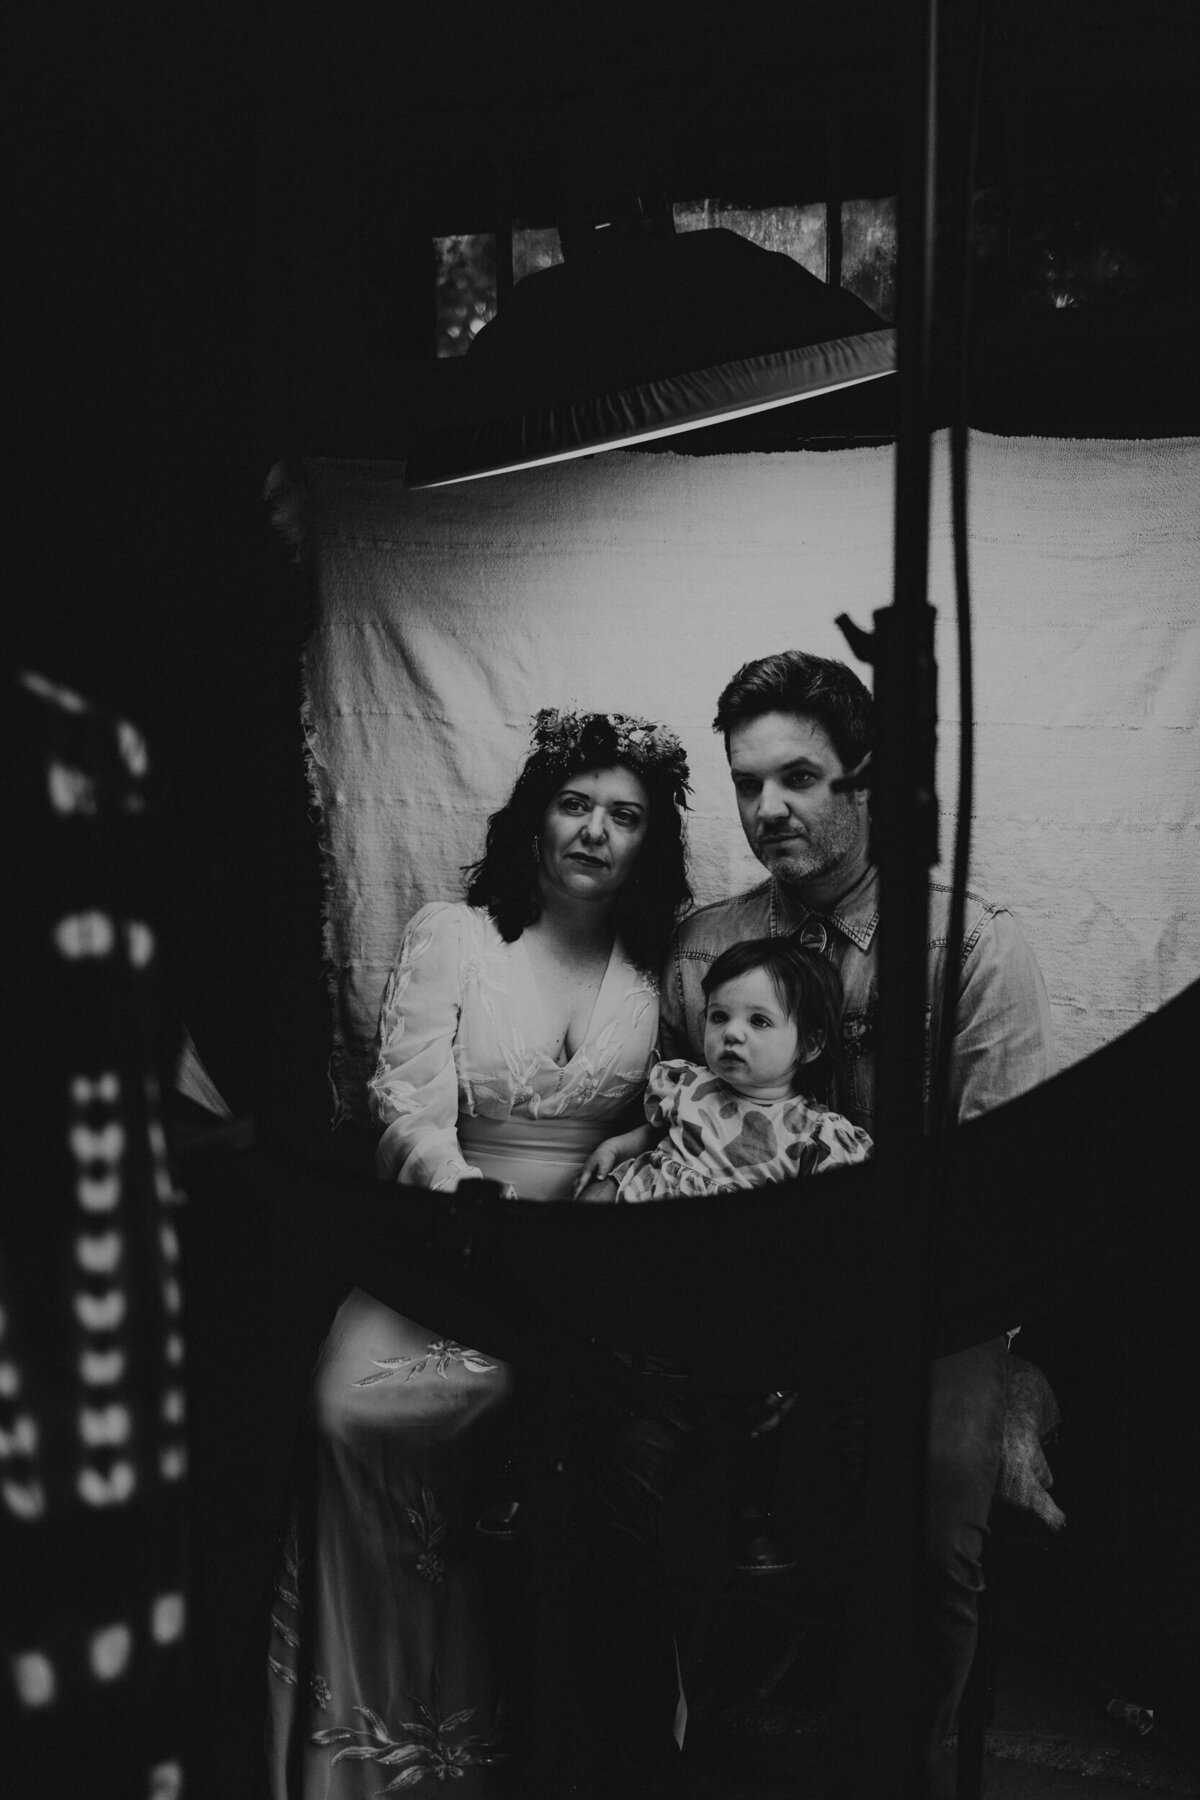 newlyweds getting a tintype portrait done during their wedding reception